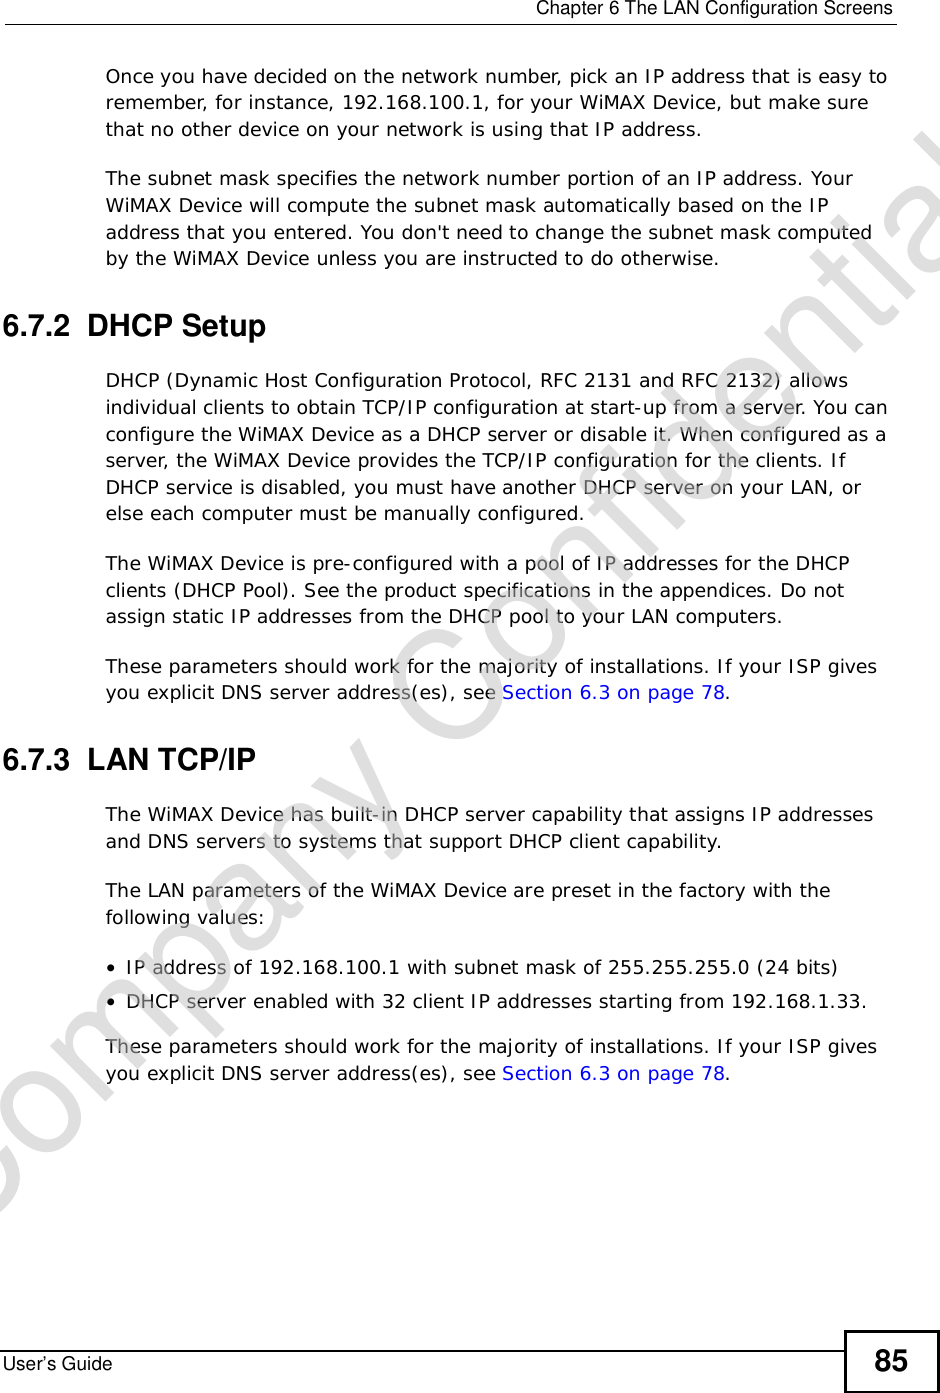  Chapter 6The LAN Configuration ScreensUser’s Guide 85Once you have decided on the network number, pick an IP address that is easy to remember, for instance, 192.168.100.1, for your WiMAX Device, but make sure that no other device on your network is using that IP address.The subnet mask specifies the network number portion of an IP address. Your WiMAX Device will compute the subnet mask automatically based on the IP address that you entered. You don&apos;t need to change the subnet mask computed by the WiMAX Device unless you are instructed to do otherwise.6.7.2  DHCP SetupDHCP (Dynamic Host Configuration Protocol, RFC 2131 and RFC 2132) allows individual clients to obtain TCP/IP configuration at start-up from a server. You can configure the WiMAX Device as a DHCP server or disable it. When configured as a server, the WiMAX Device provides the TCP/IP configuration for the clients. If DHCP service is disabled, you must have another DHCP server on your LAN, or else each computer must be manually configured.The WiMAX Device is pre-configured with a pool of IP addresses for the DHCP clients (DHCP Pool). See the product specifications in the appendices. Do not assign static IP addresses from the DHCP pool to your LAN computers.These parameters should work for the majority of installations. If your ISP gives you explicit DNS server address(es), see Section 6.3 on page 78.6.7.3  LAN TCP/IPThe WiMAX Device has built-in DHCP server capability that assigns IP addresses and DNS servers to systems that support DHCP client capability.The LAN parameters of the WiMAX Device are preset in the factory with the following values:•IP address of 192.168.100.1 with subnet mask of 255.255.255.0 (24 bits)•DHCP server enabled with 32 client IP addresses starting from 192.168.1.33. These parameters should work for the majority of installations. If your ISP gives you explicit DNS server address(es), see Section 6.3 on page 78.Company Confidential